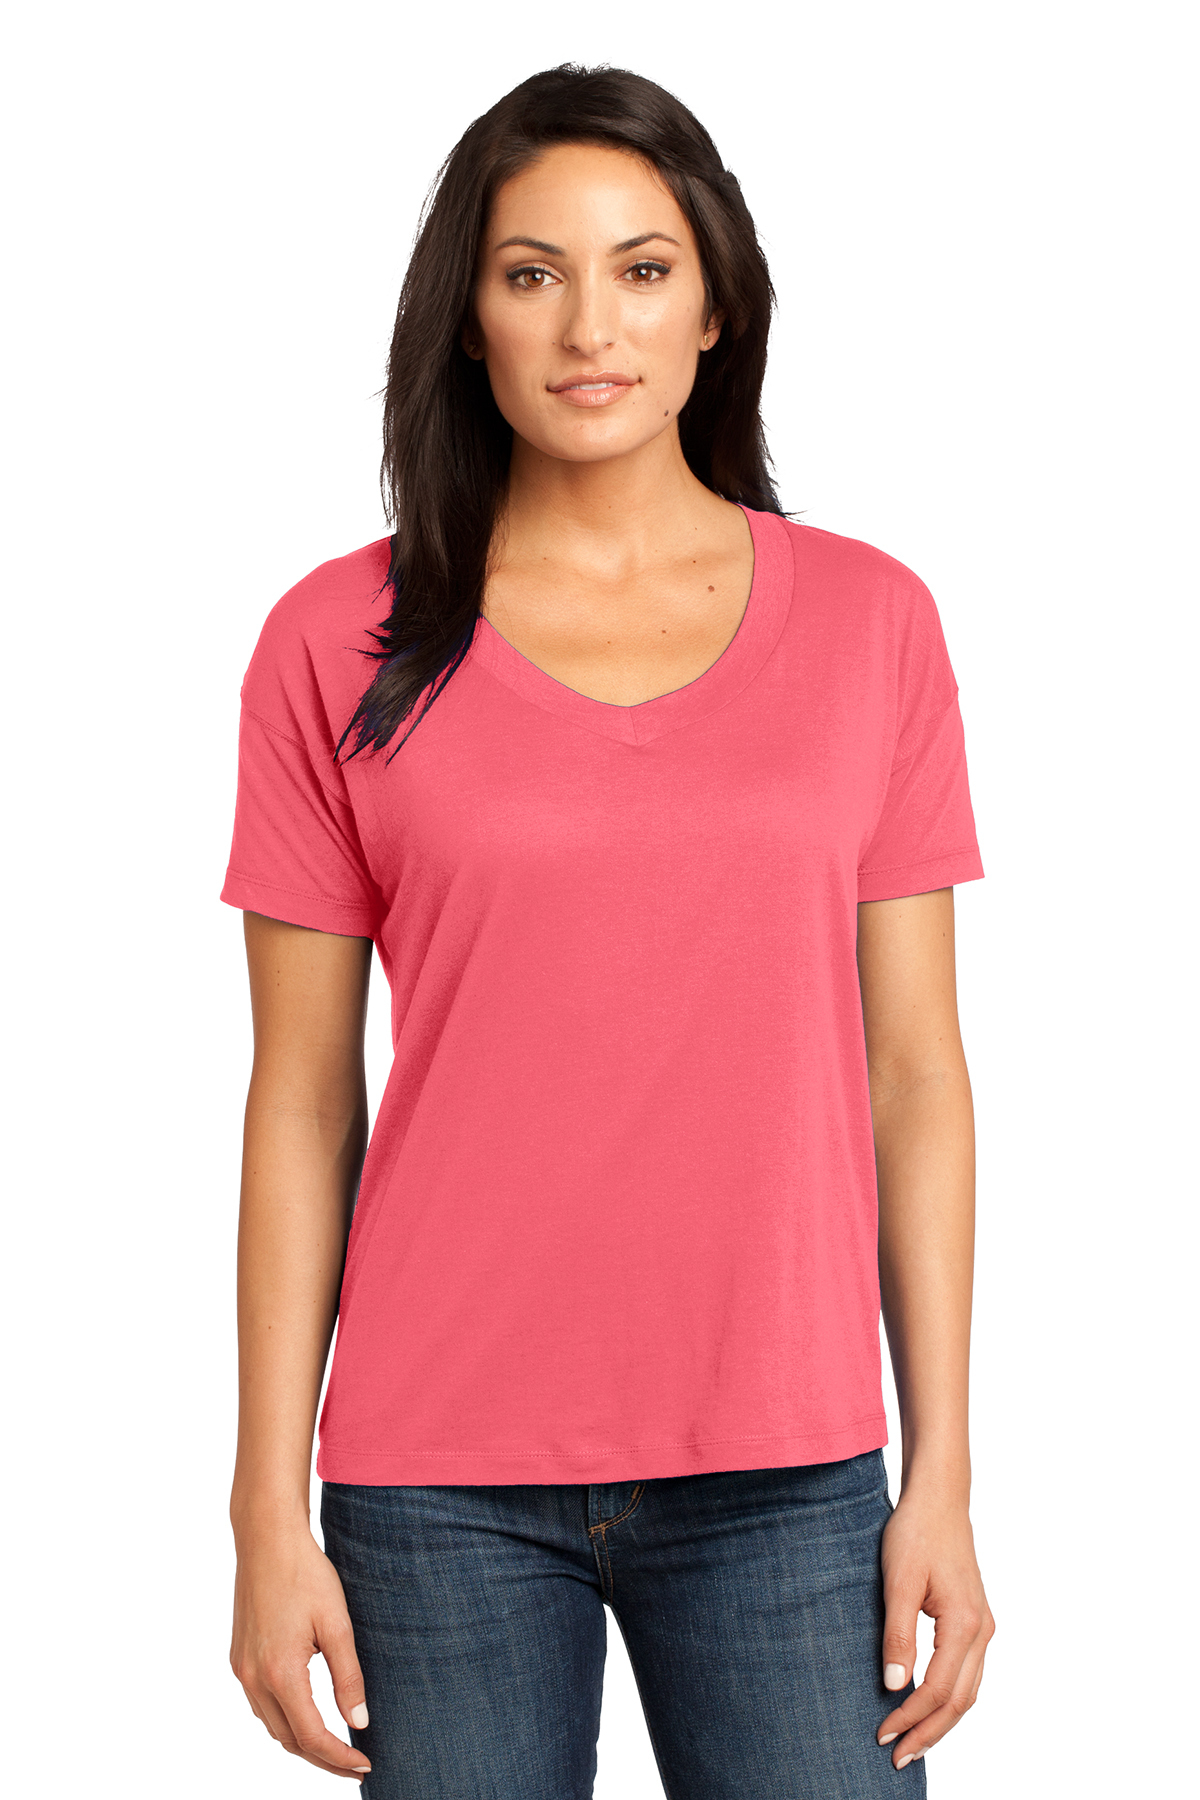 District Made - Ladies Modal Blend Relaxed V-Neck Tee | Product | SanMar